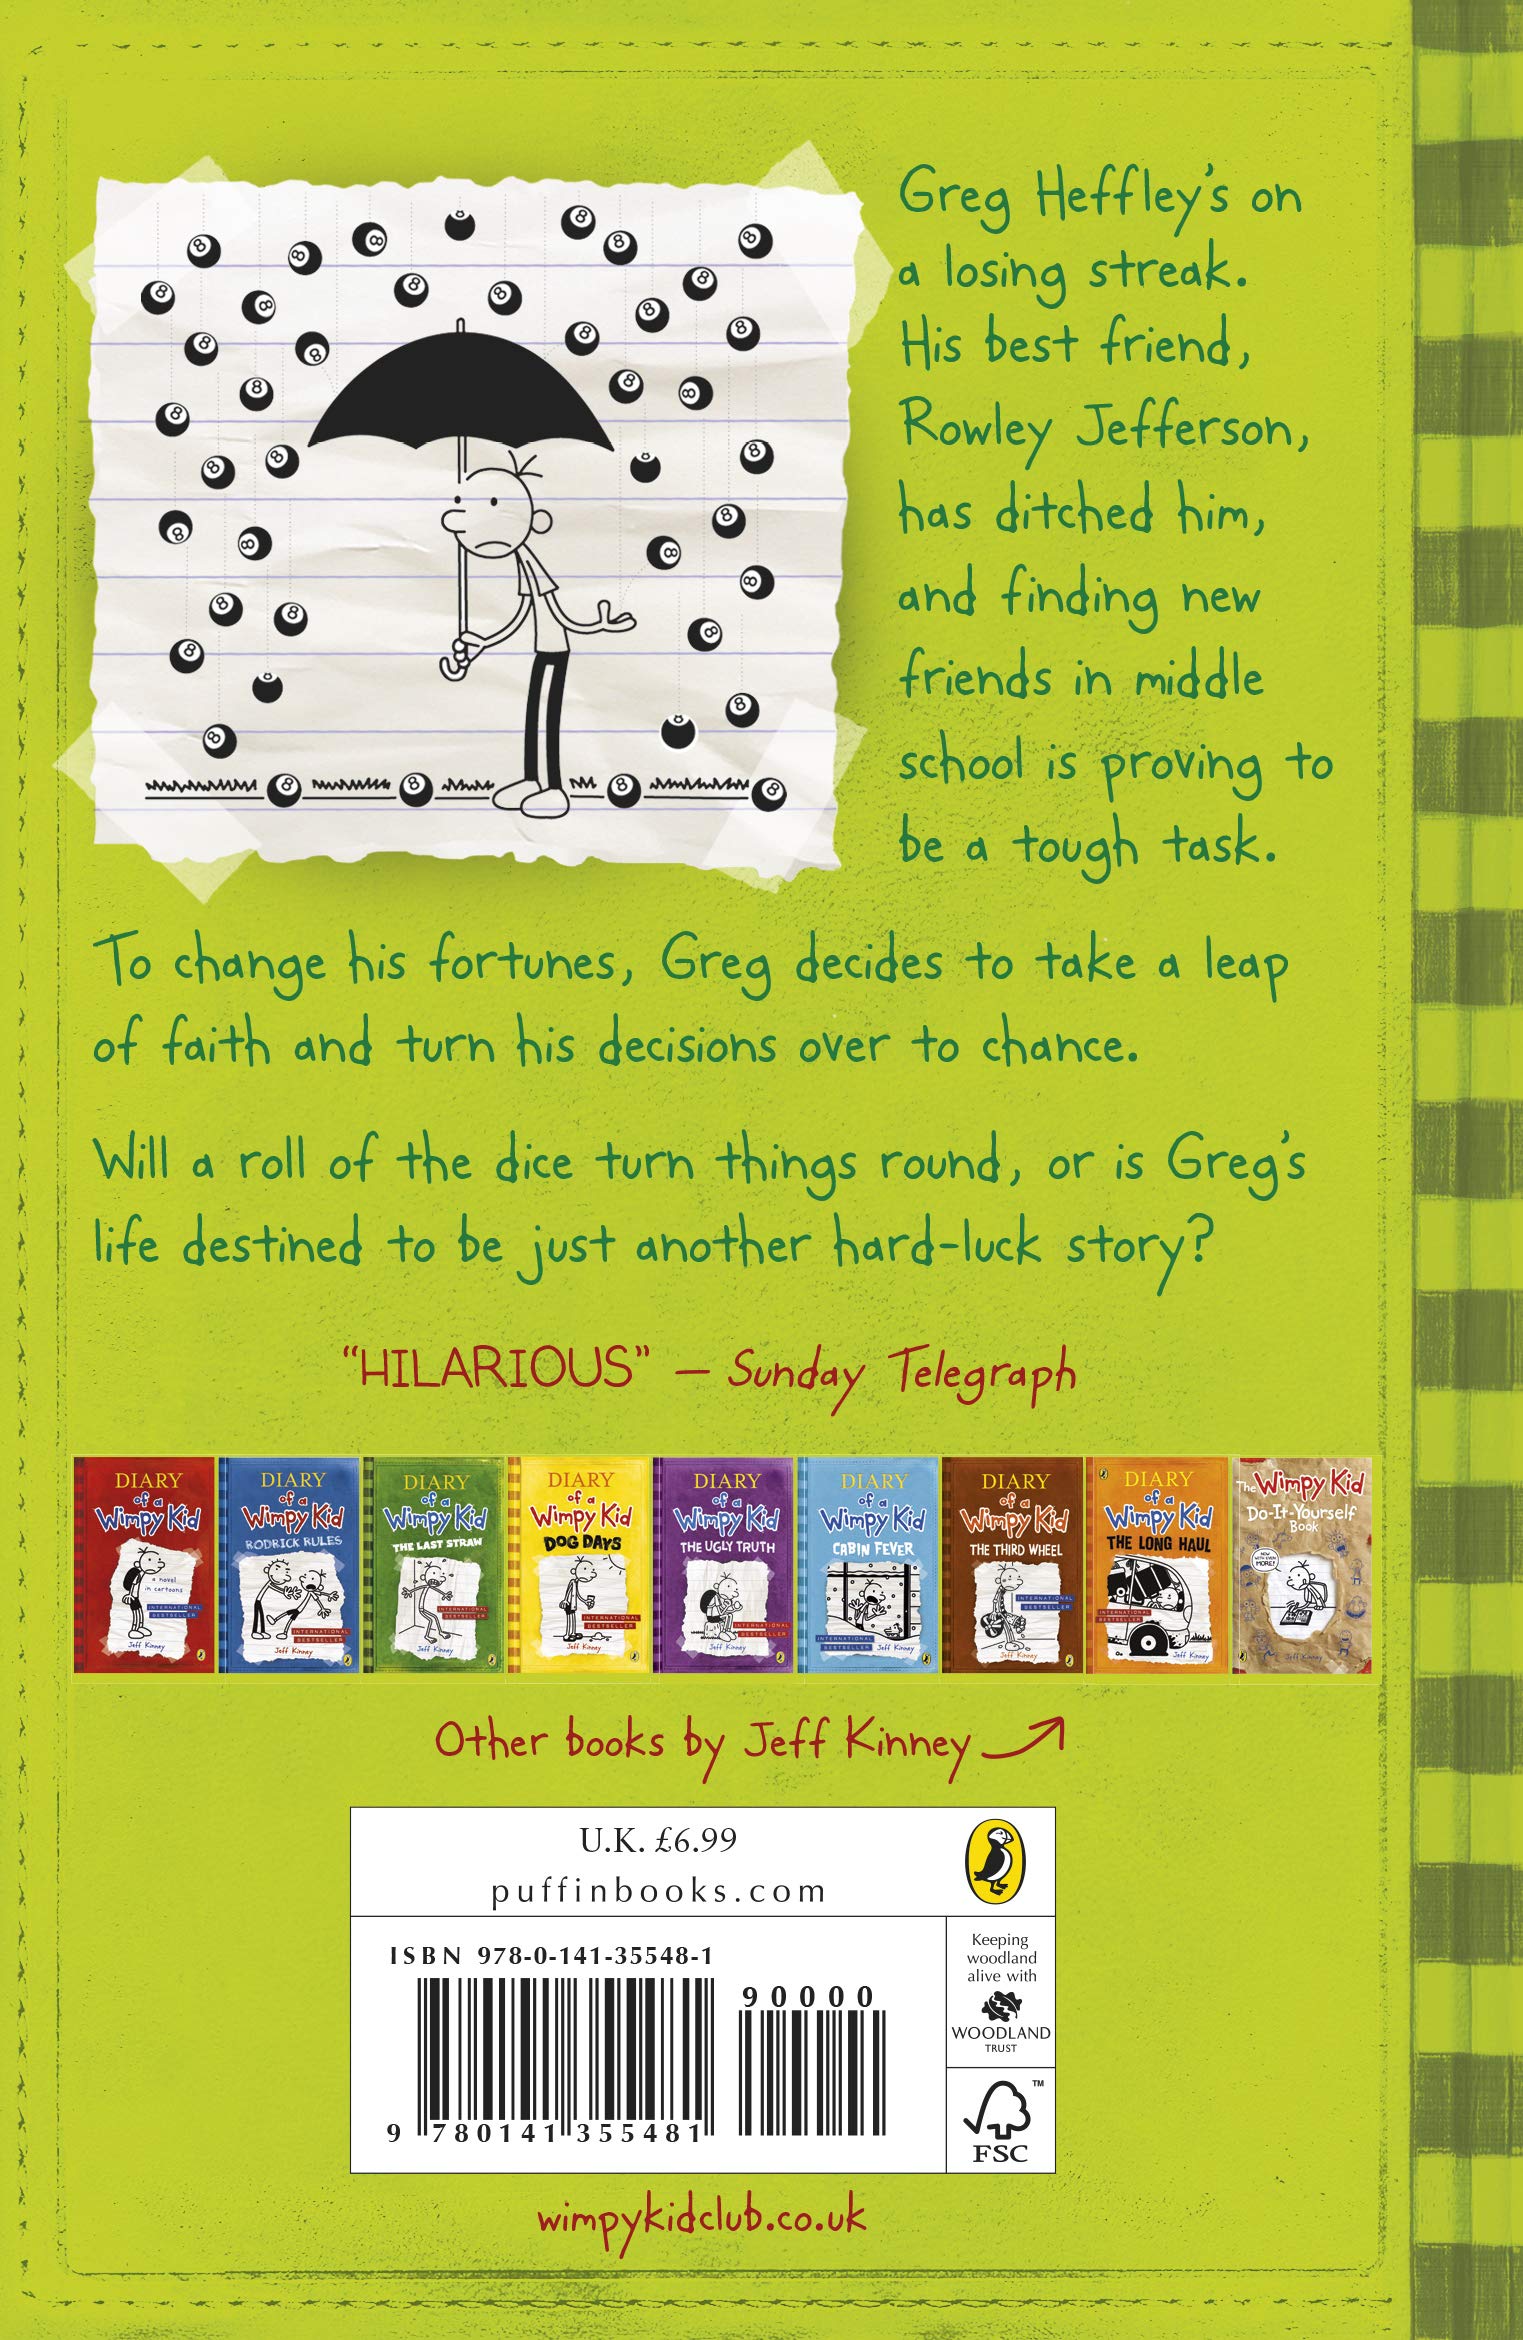 Diary of a Wimpy Kid (8): Hard luck